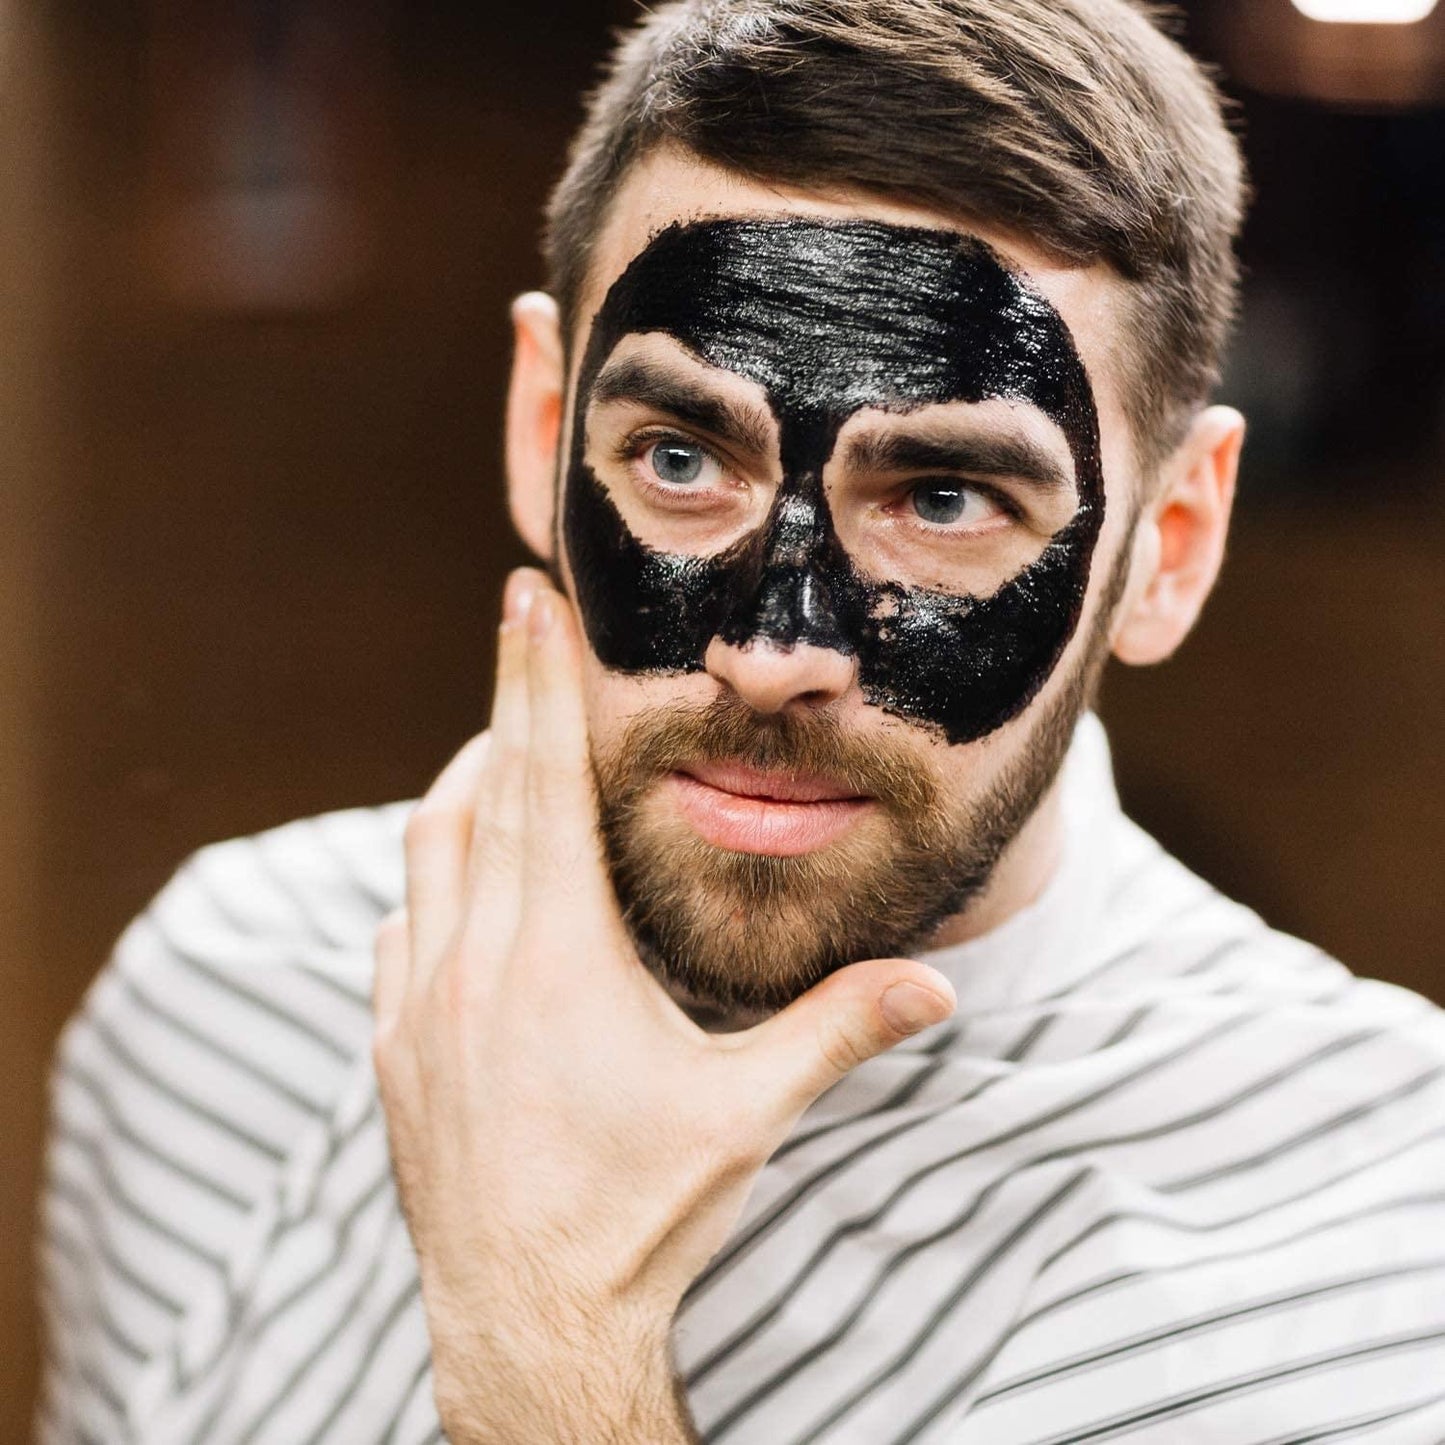 7th Heaven Activated Charcoal Black Clay Peel Off Face Mask for Men, Cleanse and Detoxify, Lifts Away Grime, Oil Control, 125ml